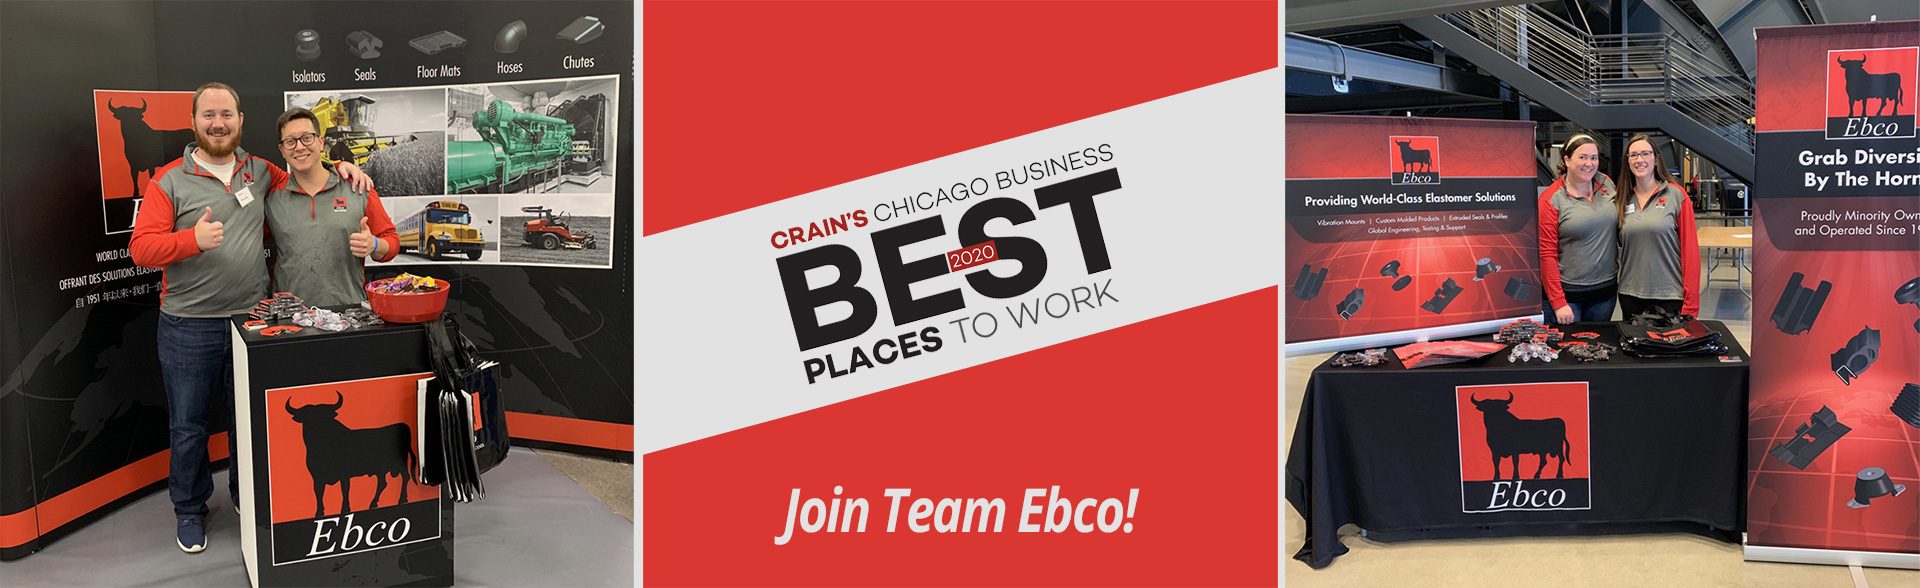 Join Team Ebco!